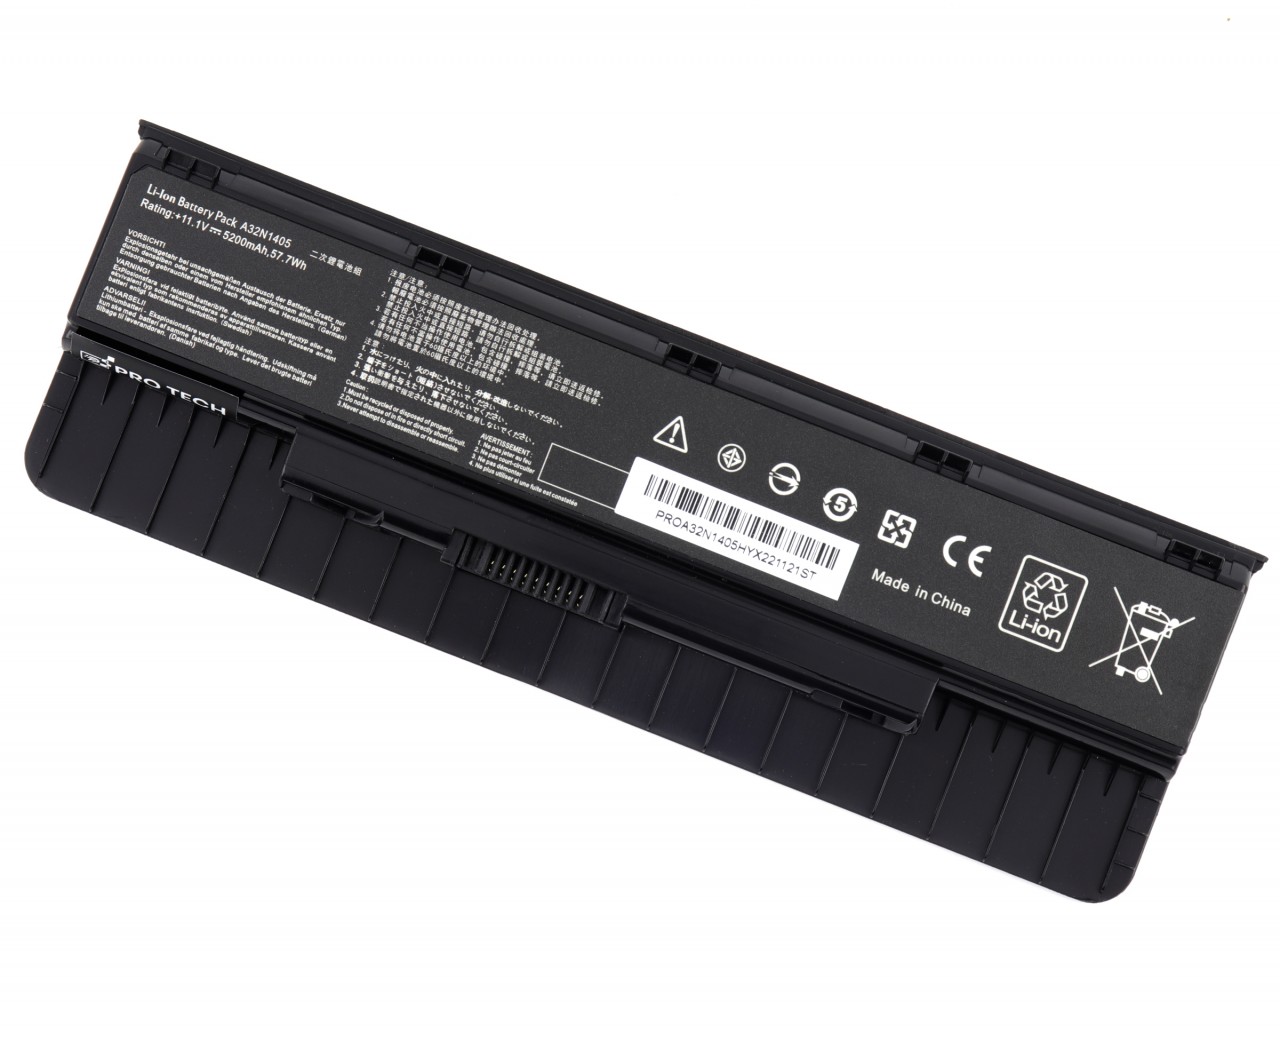 Baterie Asus N551JQ 57.7Wh / 5200mAh Protech High Quality Replacement